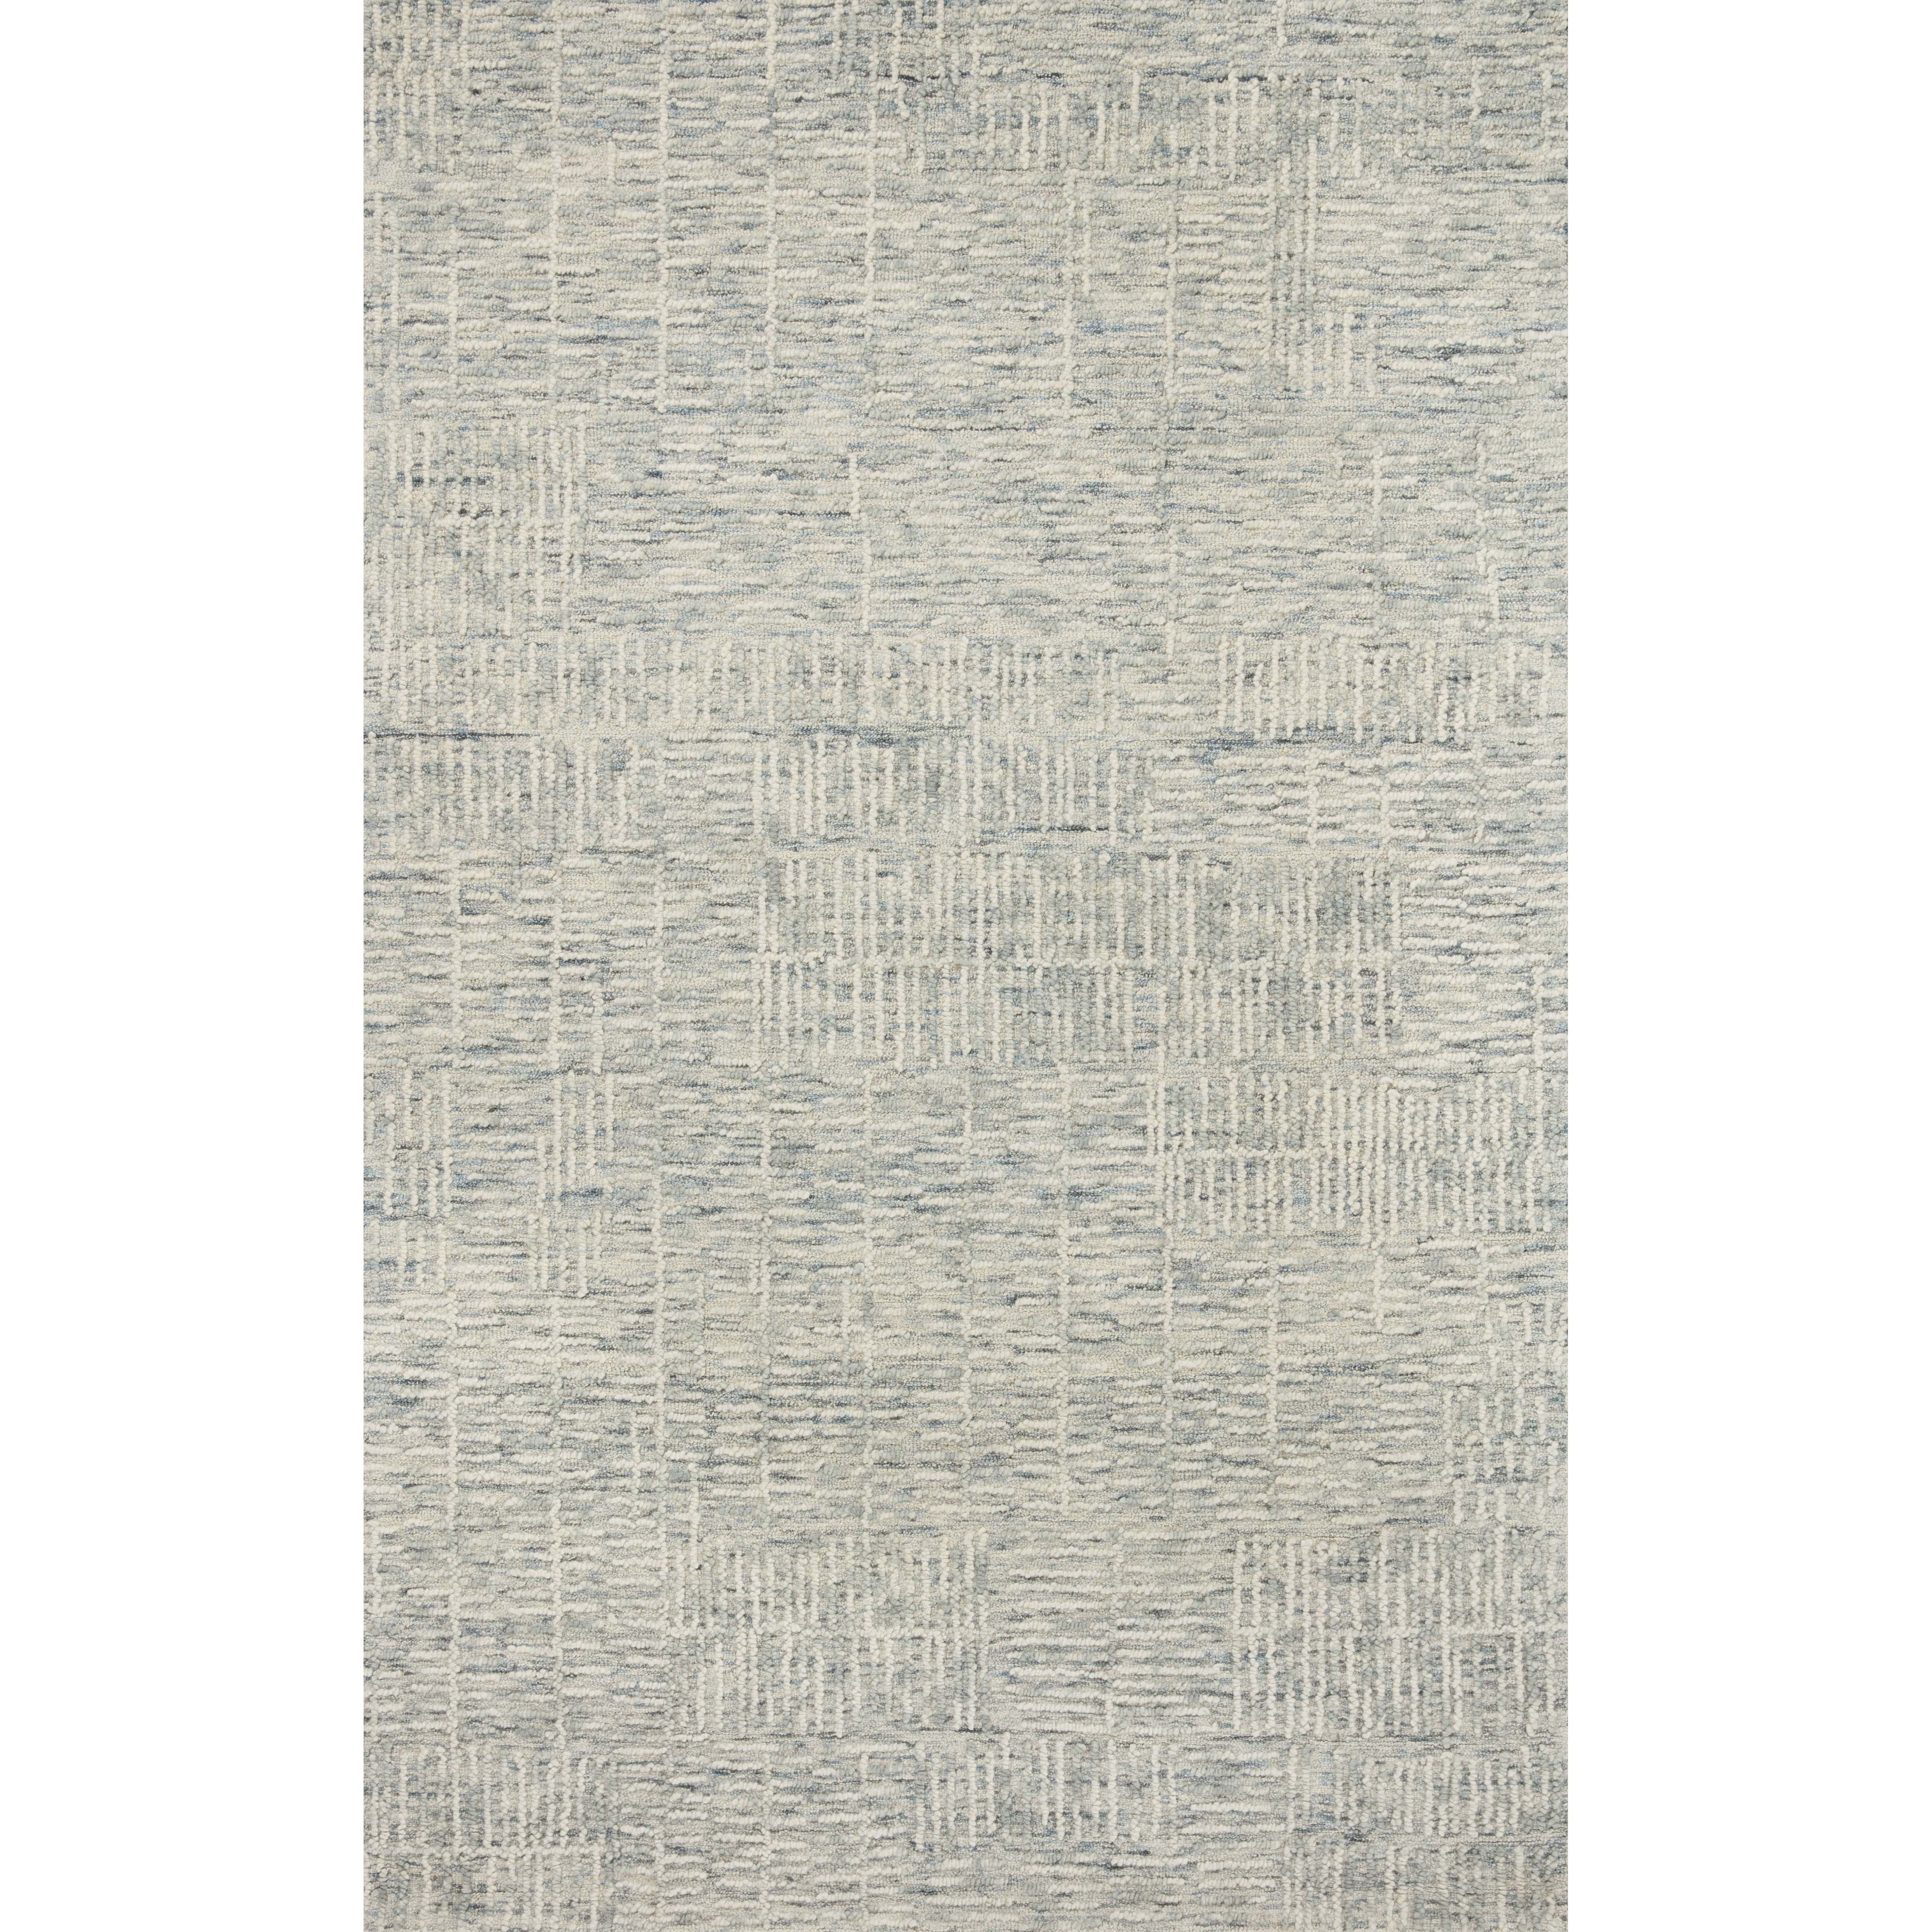 Hand-crafted with a combination of thick and fine yarns, the Tallulah Sky / Ivory Rug area rug creates dynamic dimension in living rooms, bedrooms, and more. The thicker yarns define the abstract, linear design, giving the rug a distinct high-low texture and sense of movement. Tallulah's soft, neutral palettes have a depth of tone inspired by watercolor pigmentation. Amethyst Home provides interior design, new construction, custom furniture, and area rugs in the Kansas City metro area.